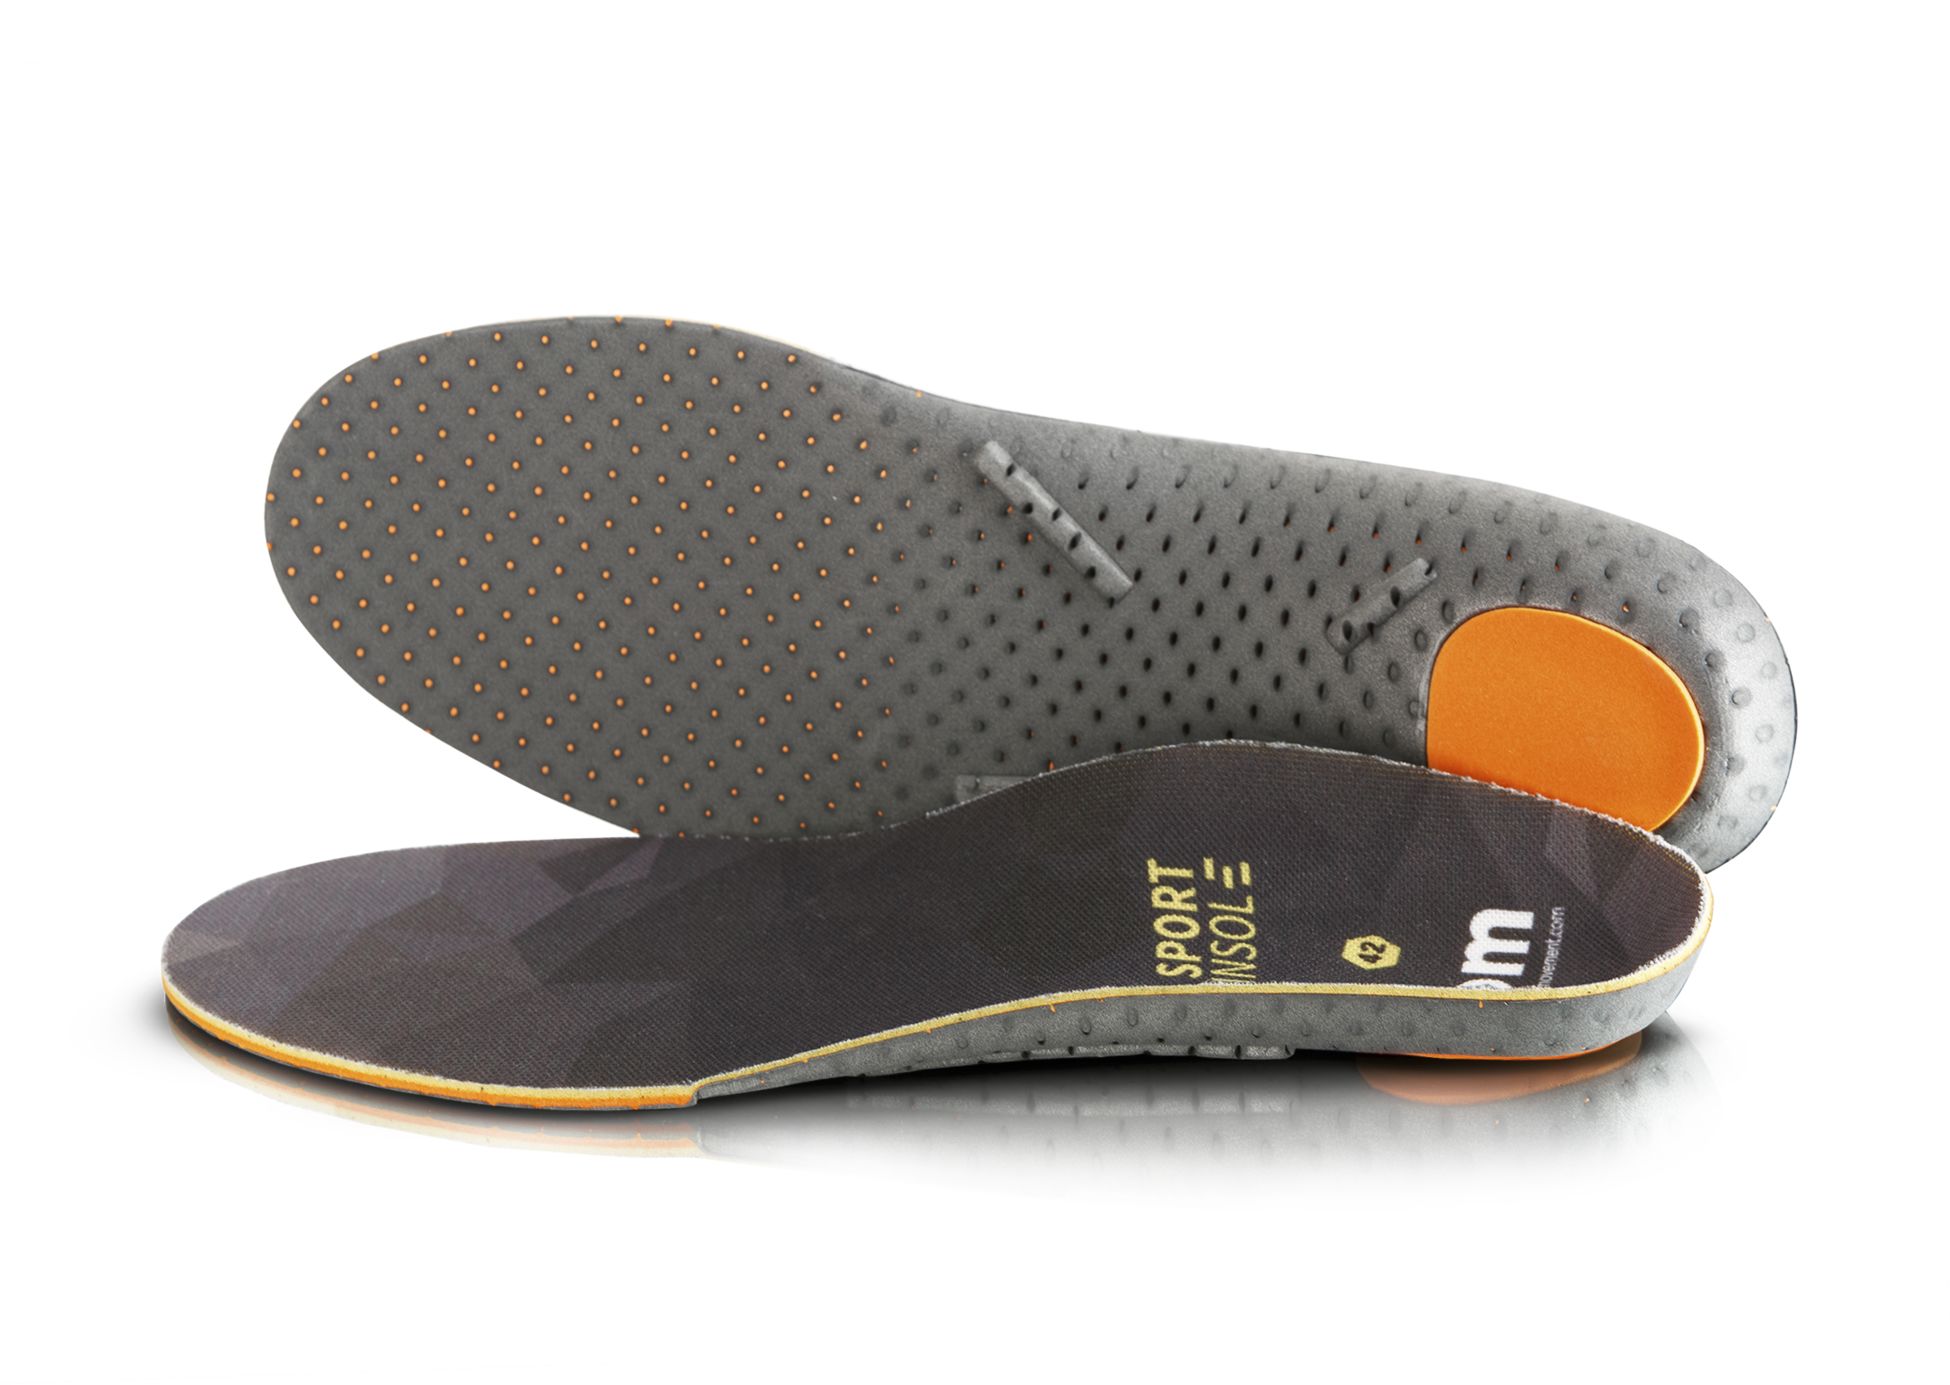 ORTHO MOVEMENT, SPORT INSOLE